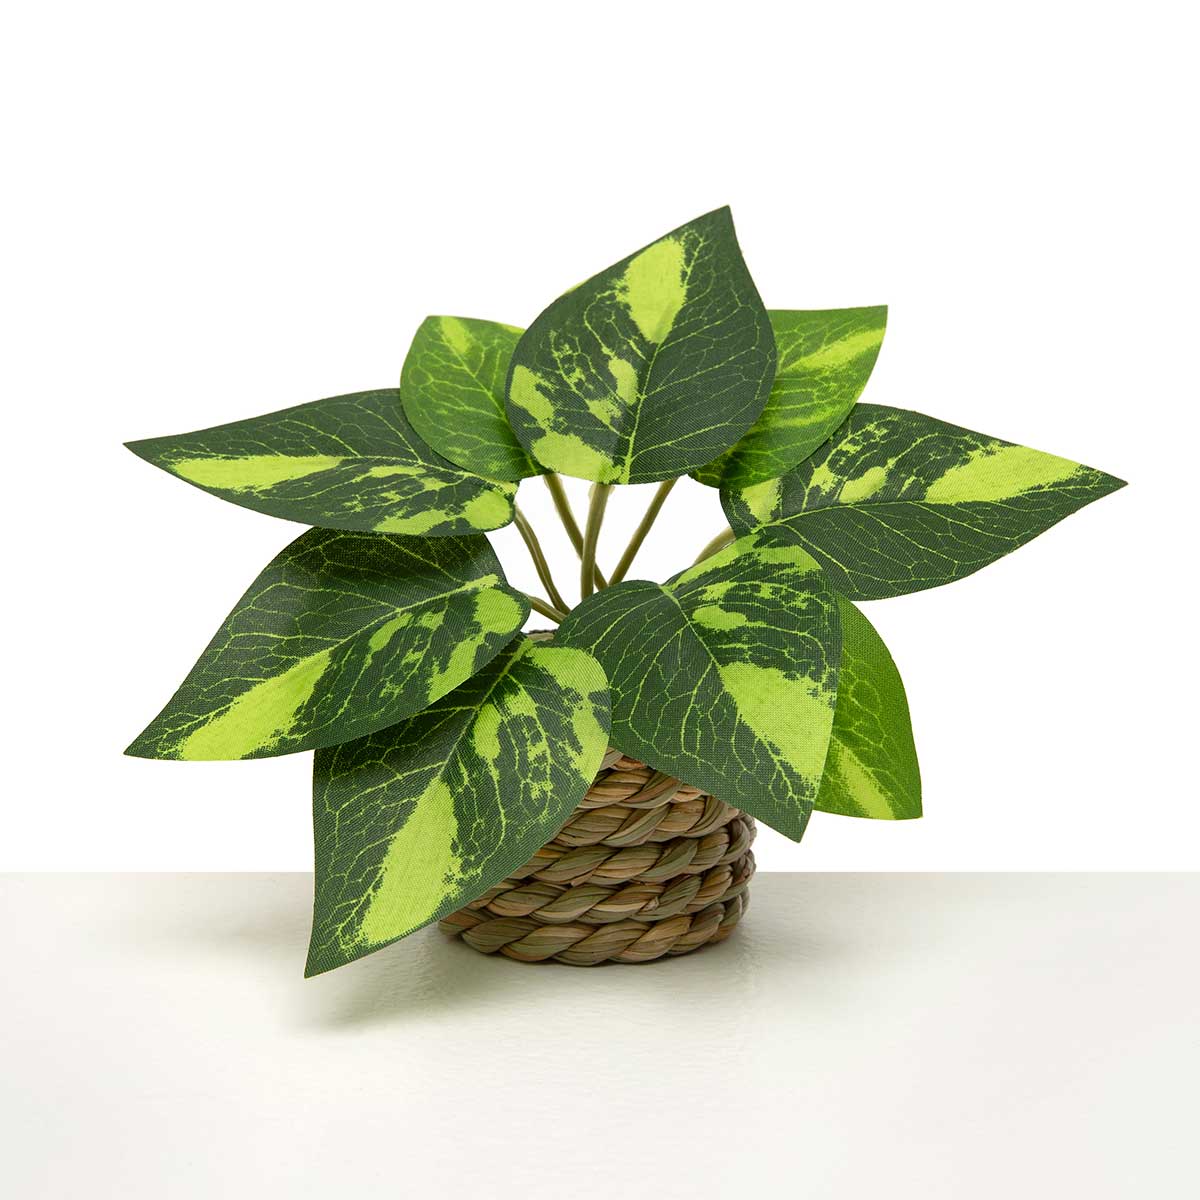 VARIEGATED POTHOS IN BASKET 6IN X 3.75IN (2IN X 2IN POT) - Click Image to Close